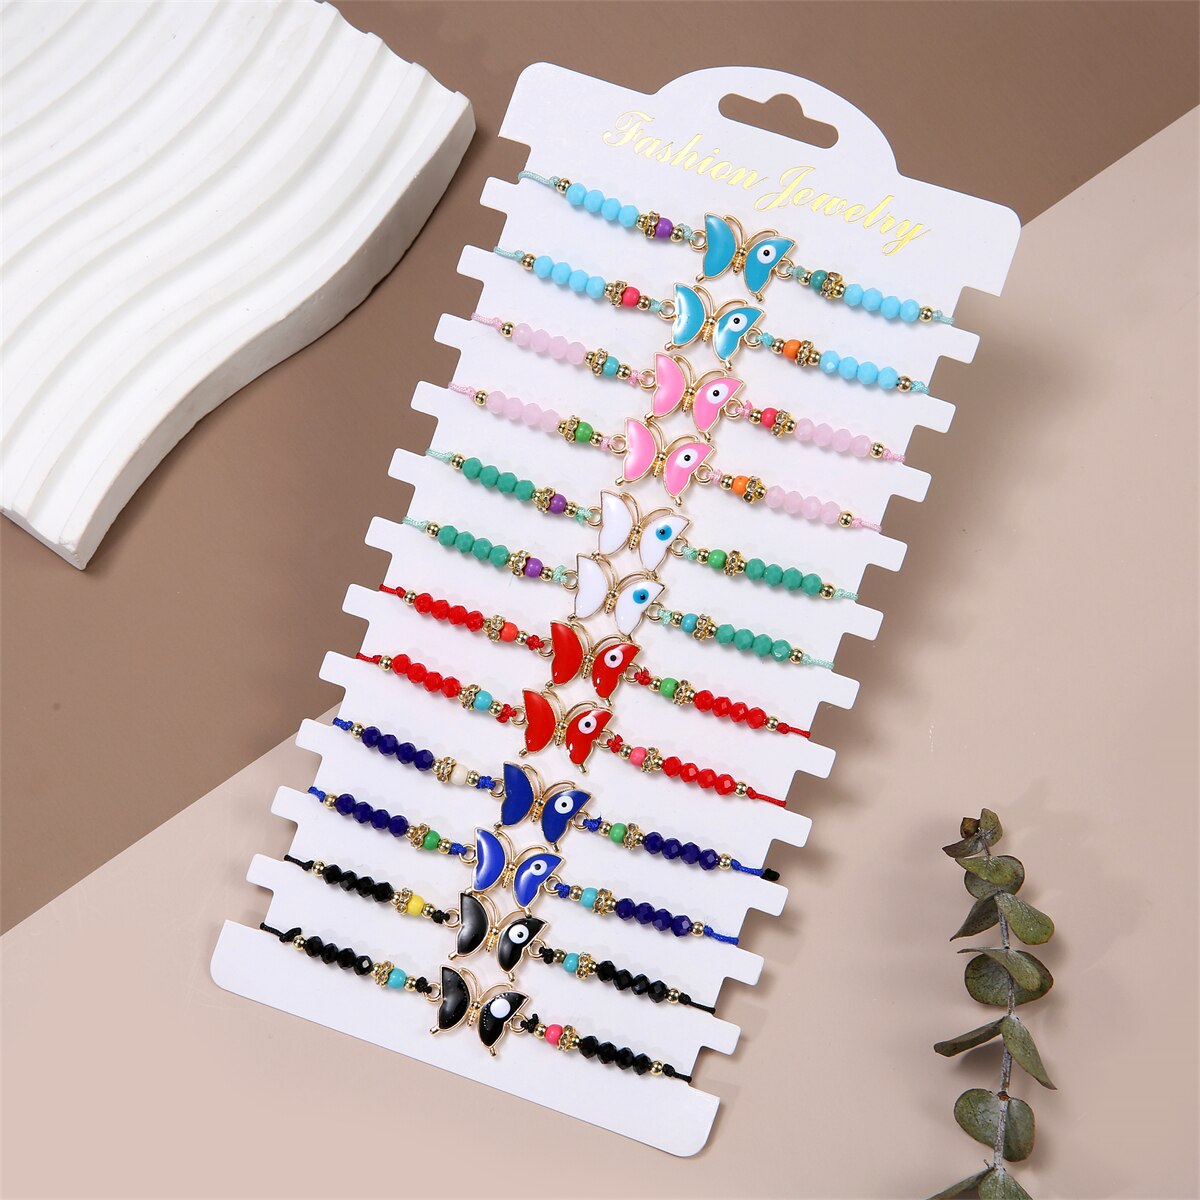 12PCS Colorful Butterfly Pendant Charms Bracelets for Women Girl Child Crystal Beads Braided Rope Bracelet Handmade Jewelry